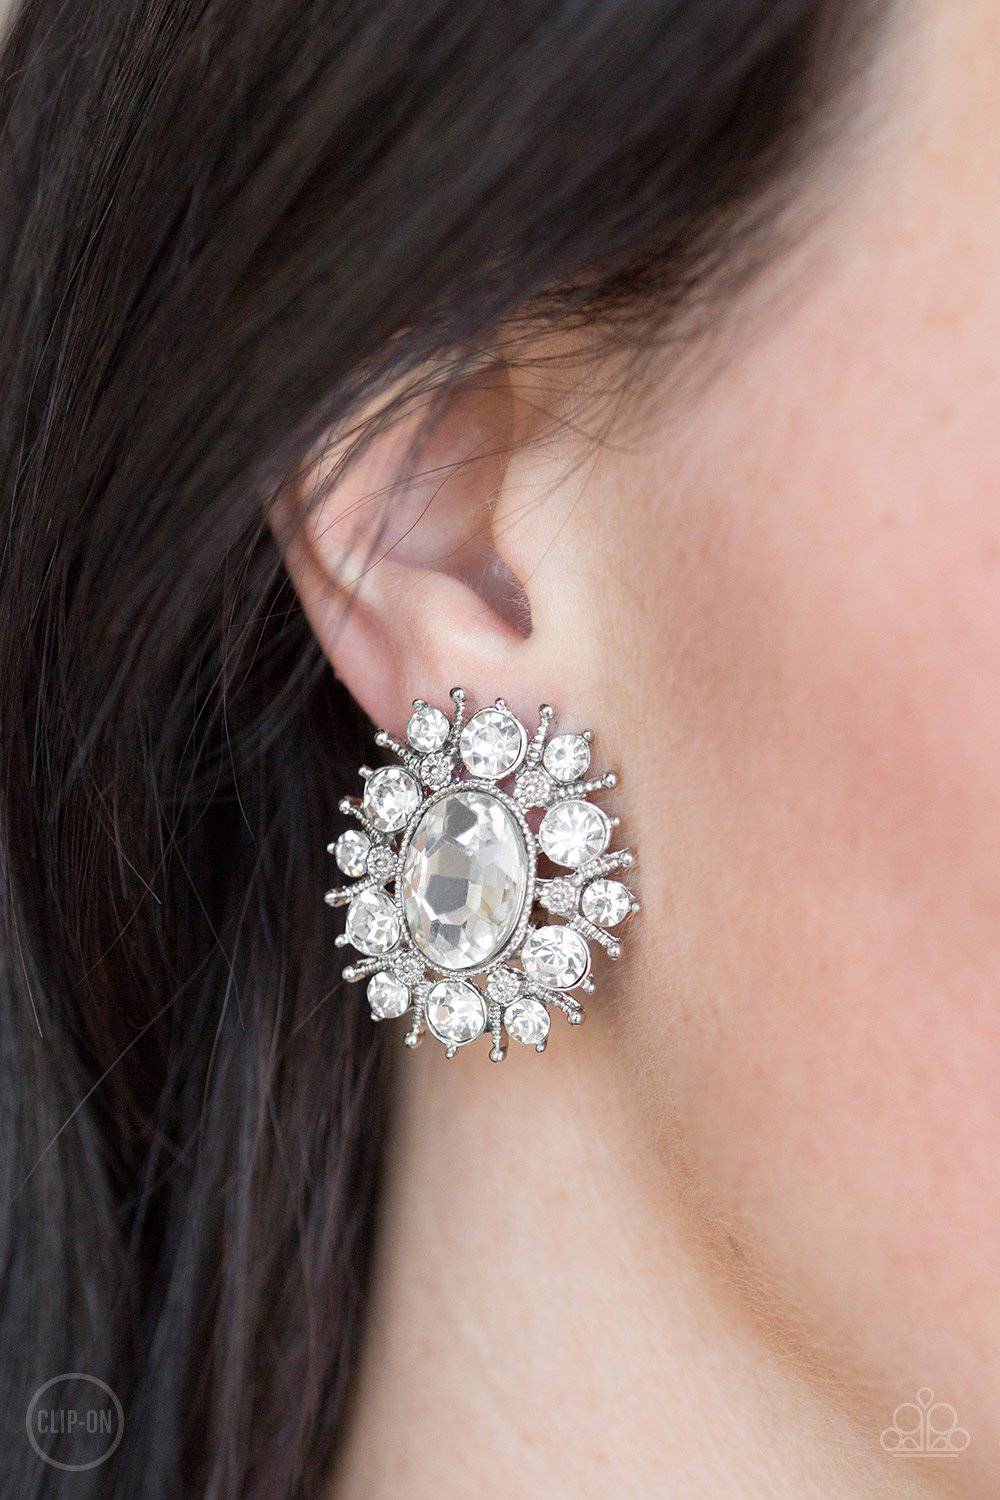 Serious Star Power White Clip-on Earrings - Paparazzi Accessories - GlaMarous Titi Jewels